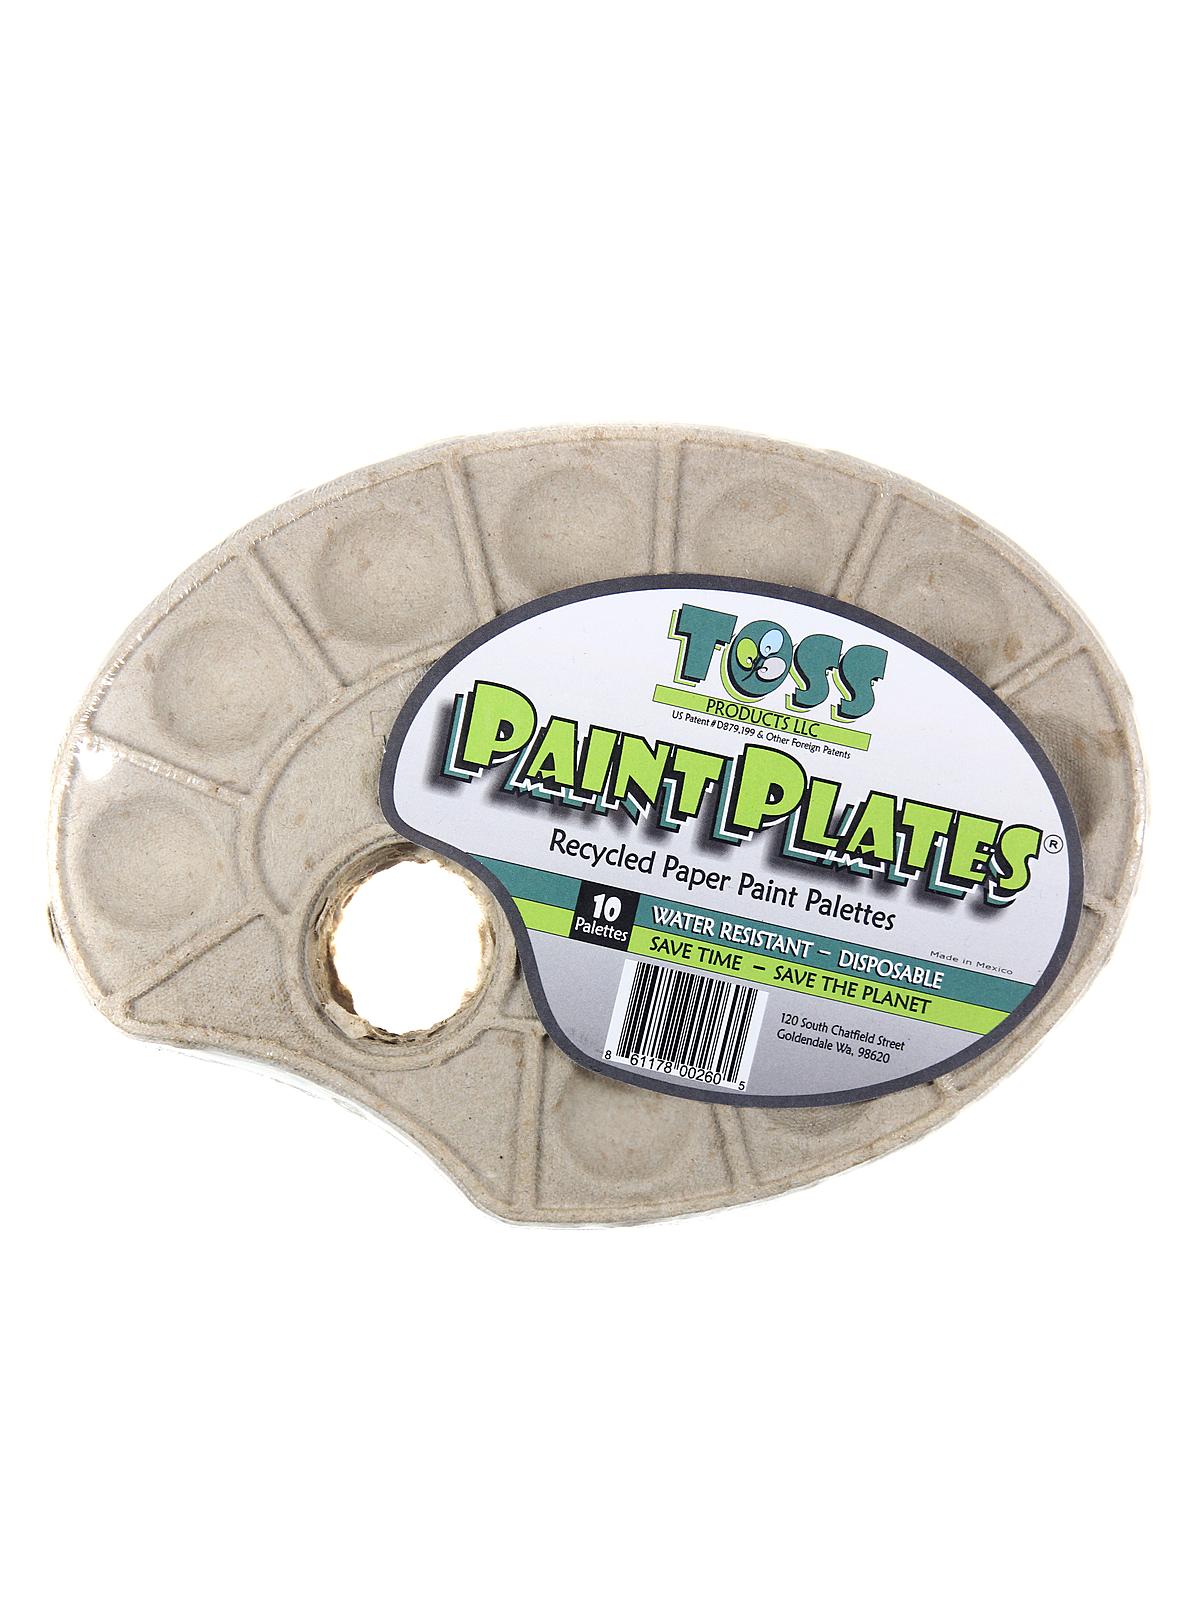 Paint Plates 6 1 2 In. X 9 In. Pack Of 10